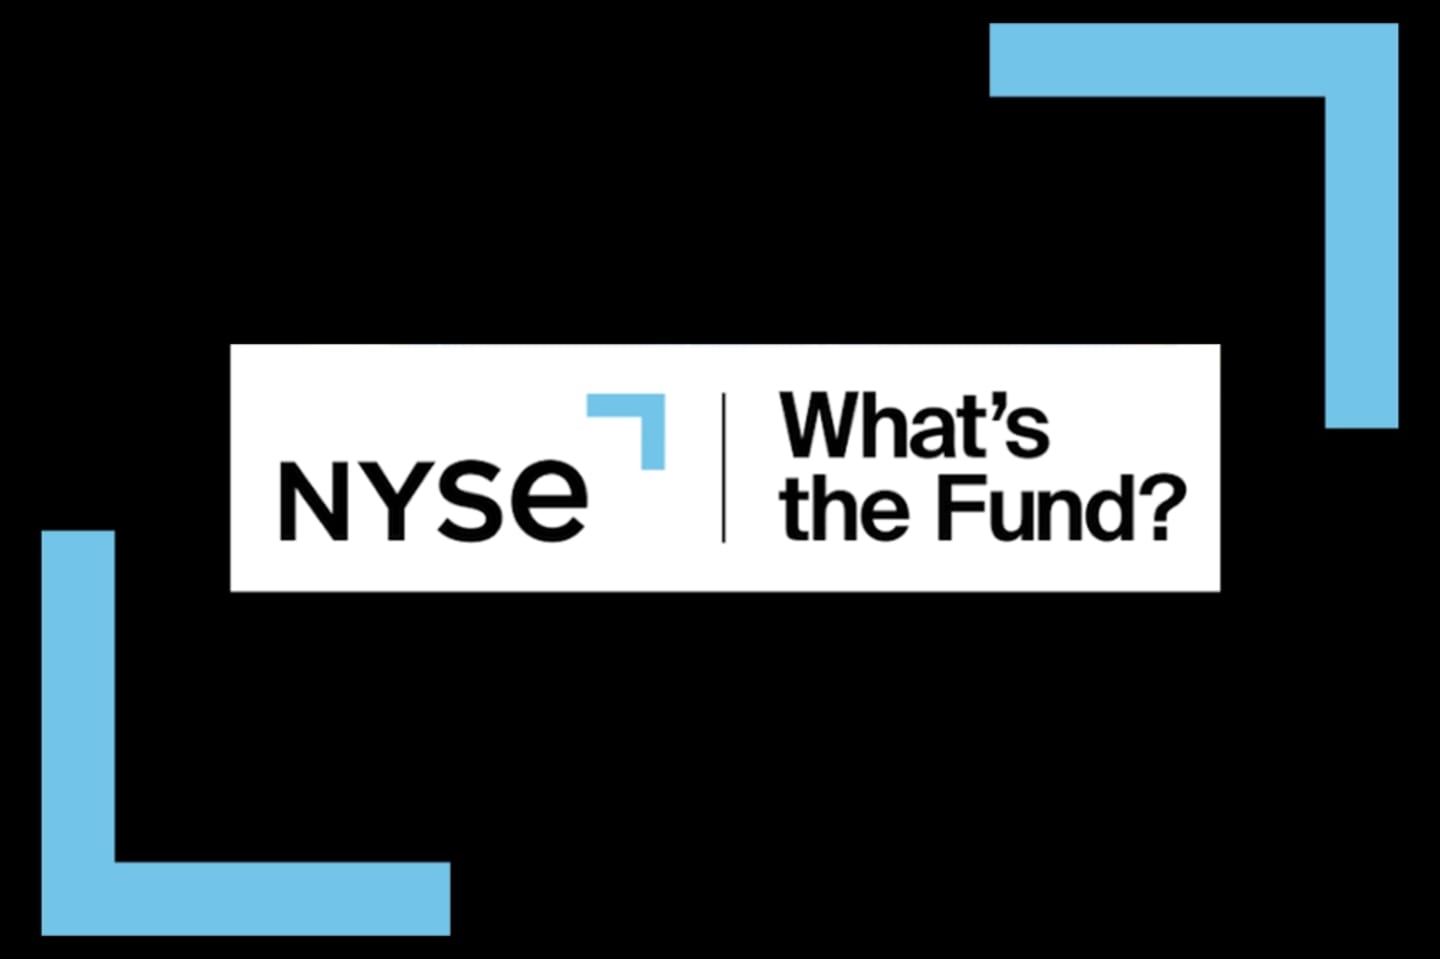 NYSE - What's the Fund?